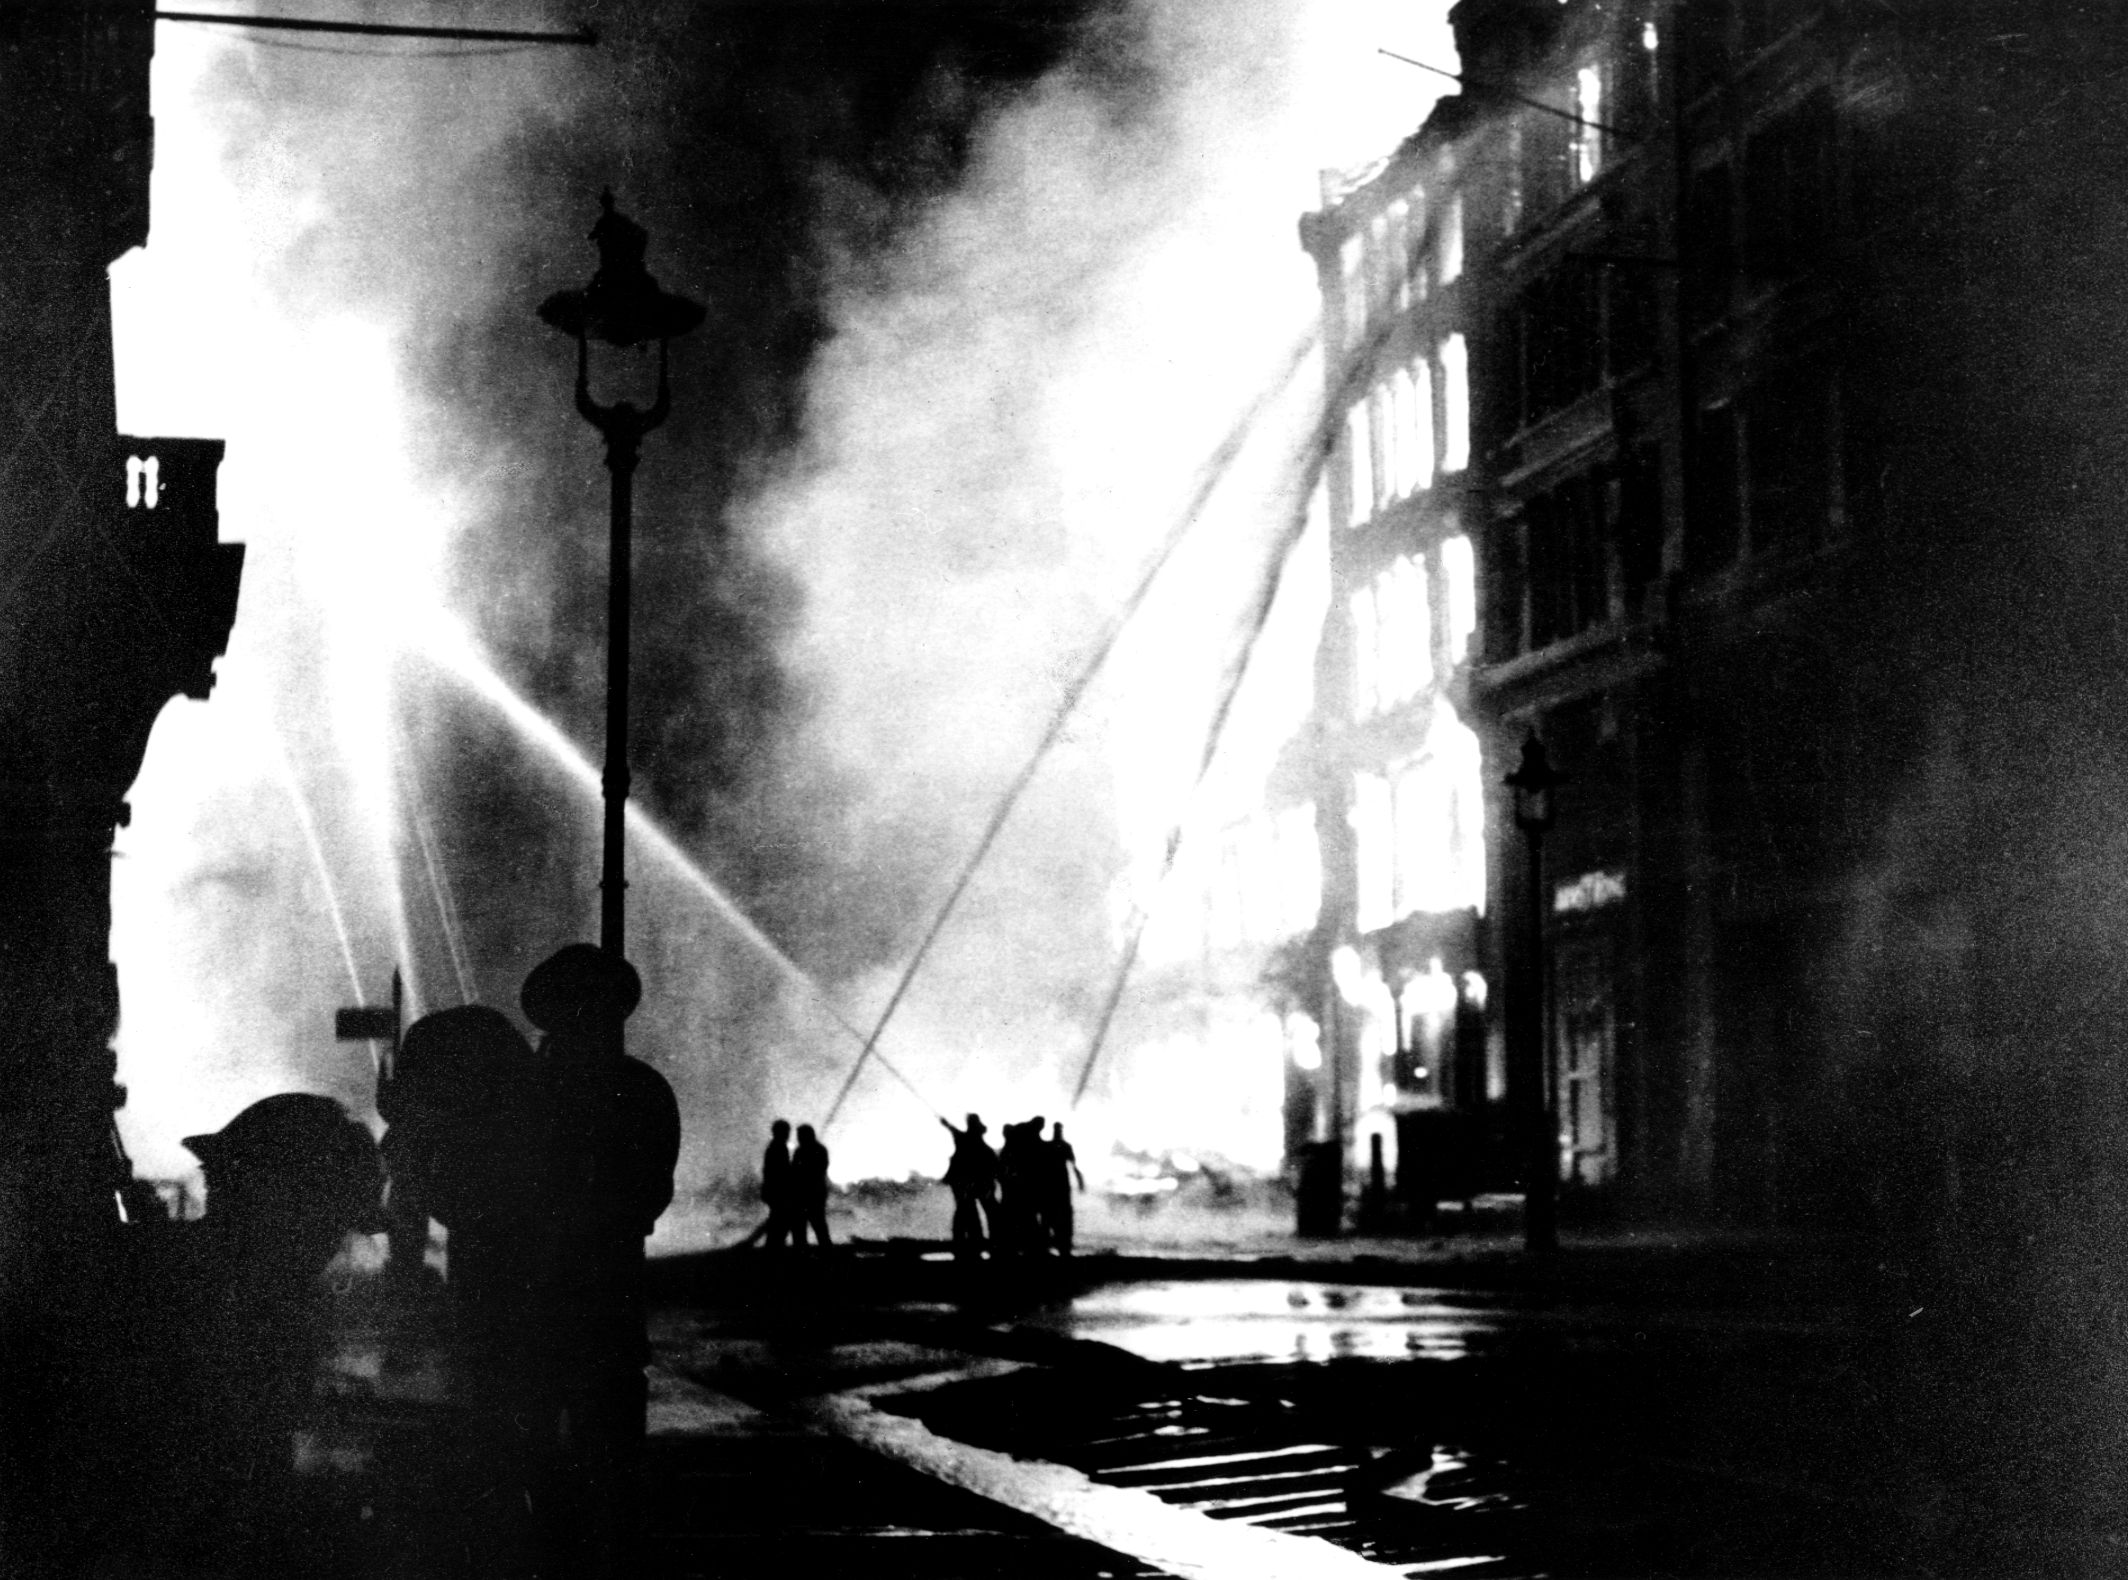 By the end of 1940, nearly 20,000 incendiary bombs had been dropped on London by the Luftwaffe. The London Fire Brigade, several of its members shown here silhouetted against a burning building and directing streams of water toward the flames, performed heroically while battling stricken areas.